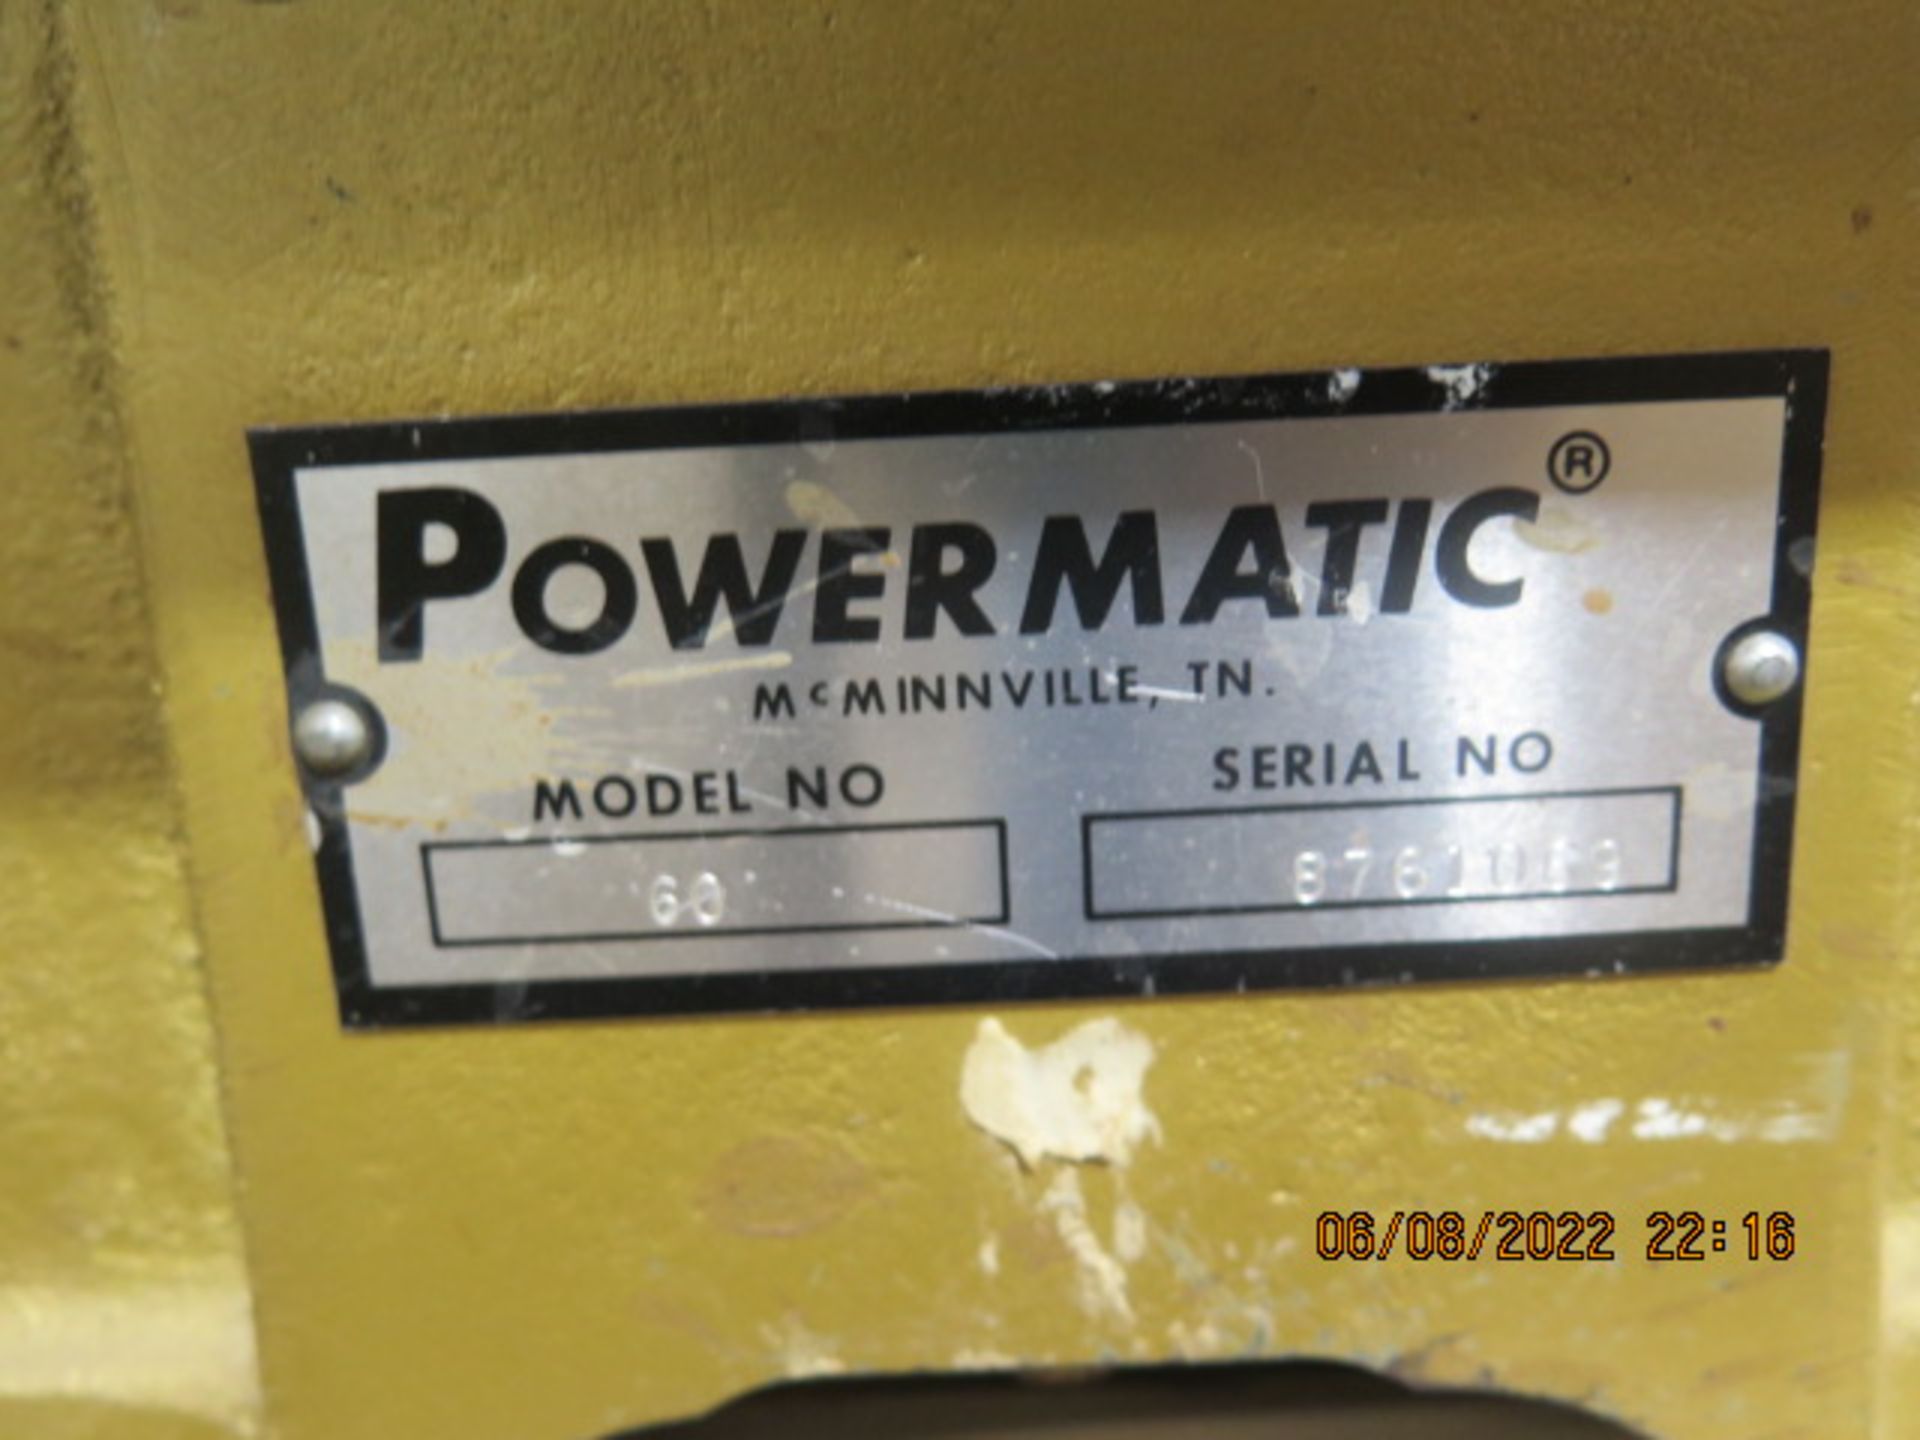 Powermatic mdl. 60 8” Jointer s/n 8761069 (SOLD AS-IS - NO WARRANTY) - Image 7 of 7